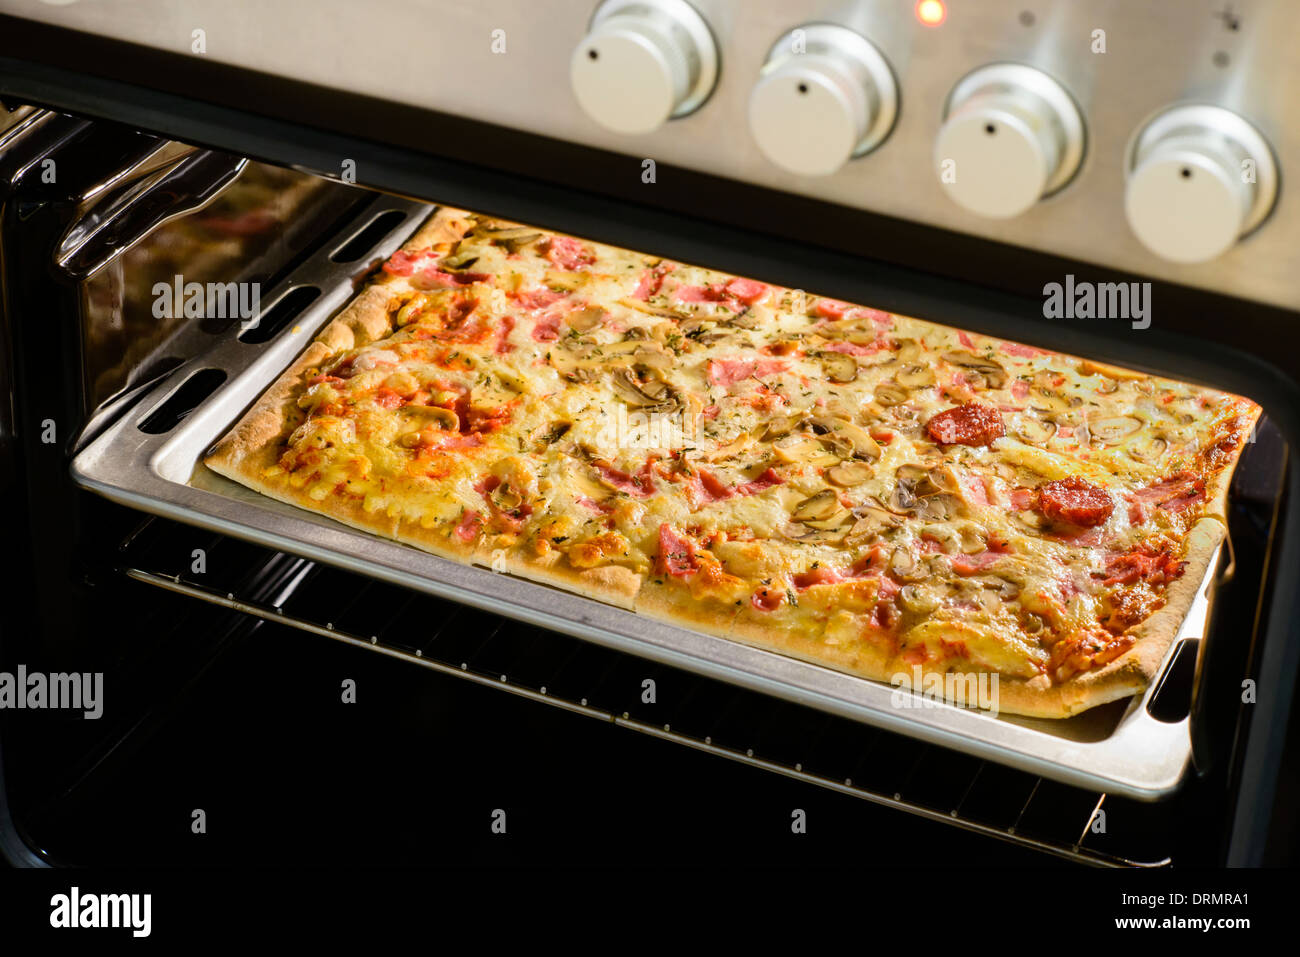 Homemade pepperoni pizza in oven Stock Photo